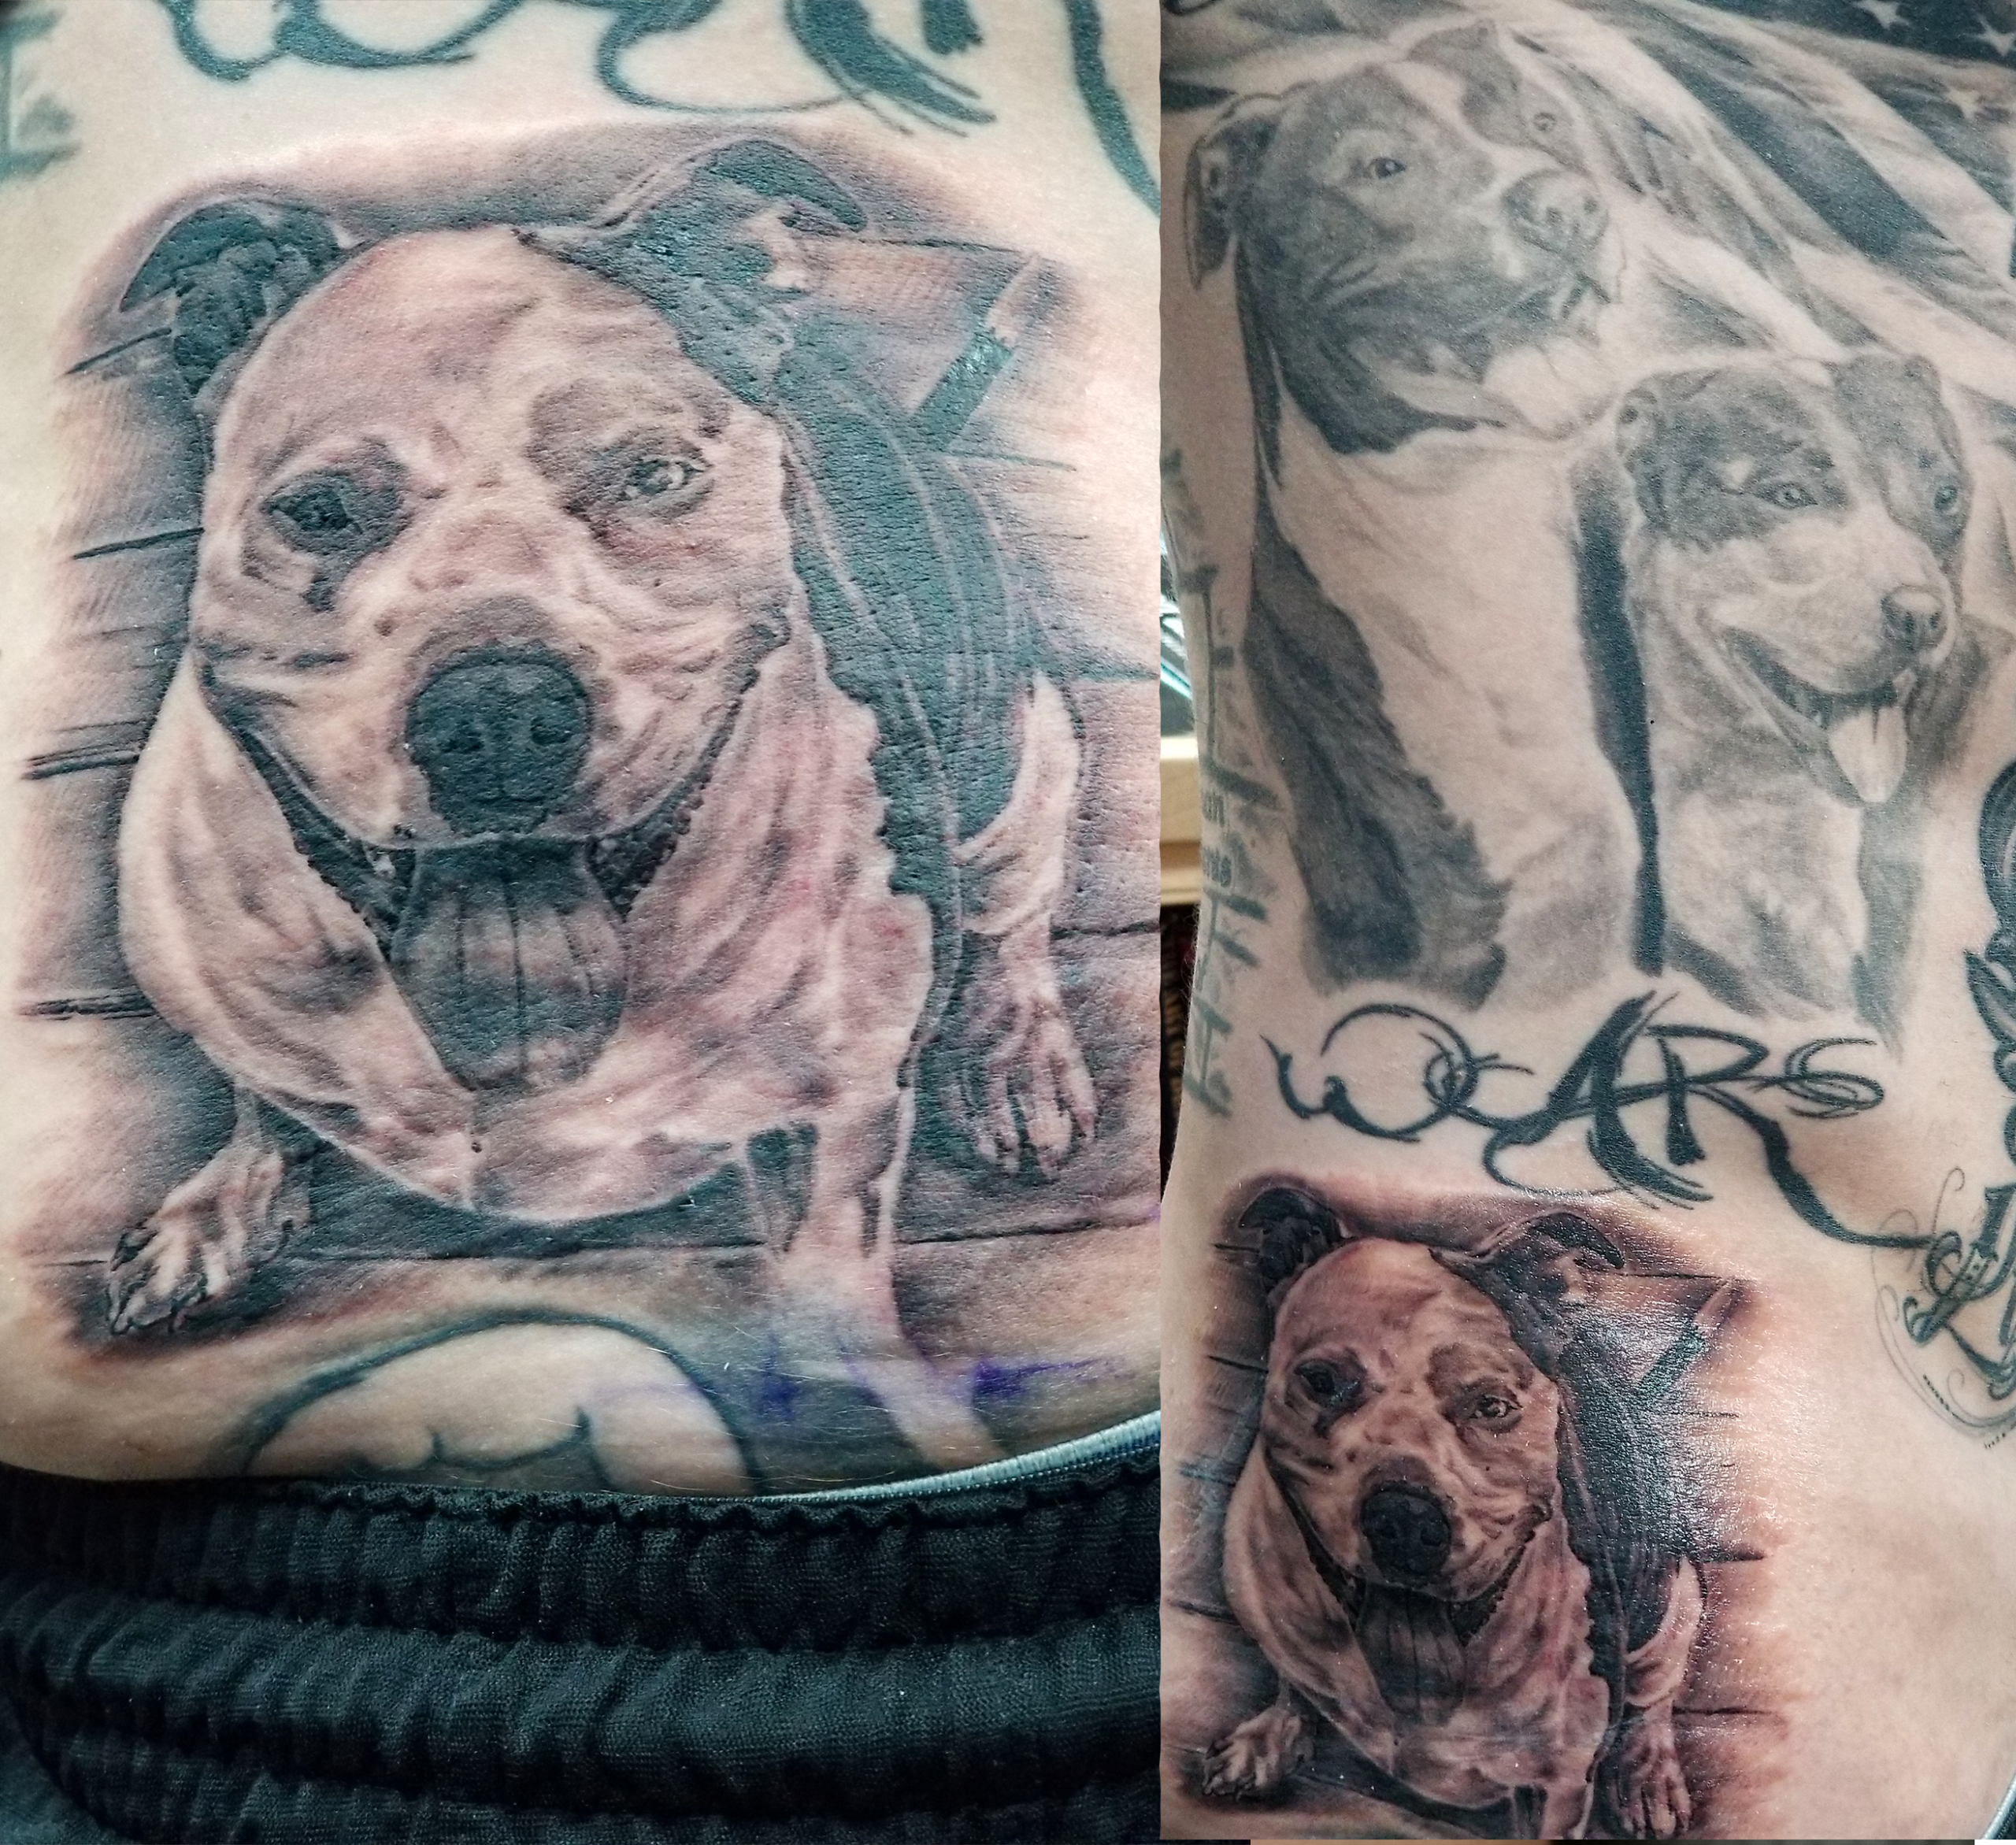 Two healed portraits of his old dogs, healed around 4 years. Newest pitbull portrait below and in detailed enlargement.